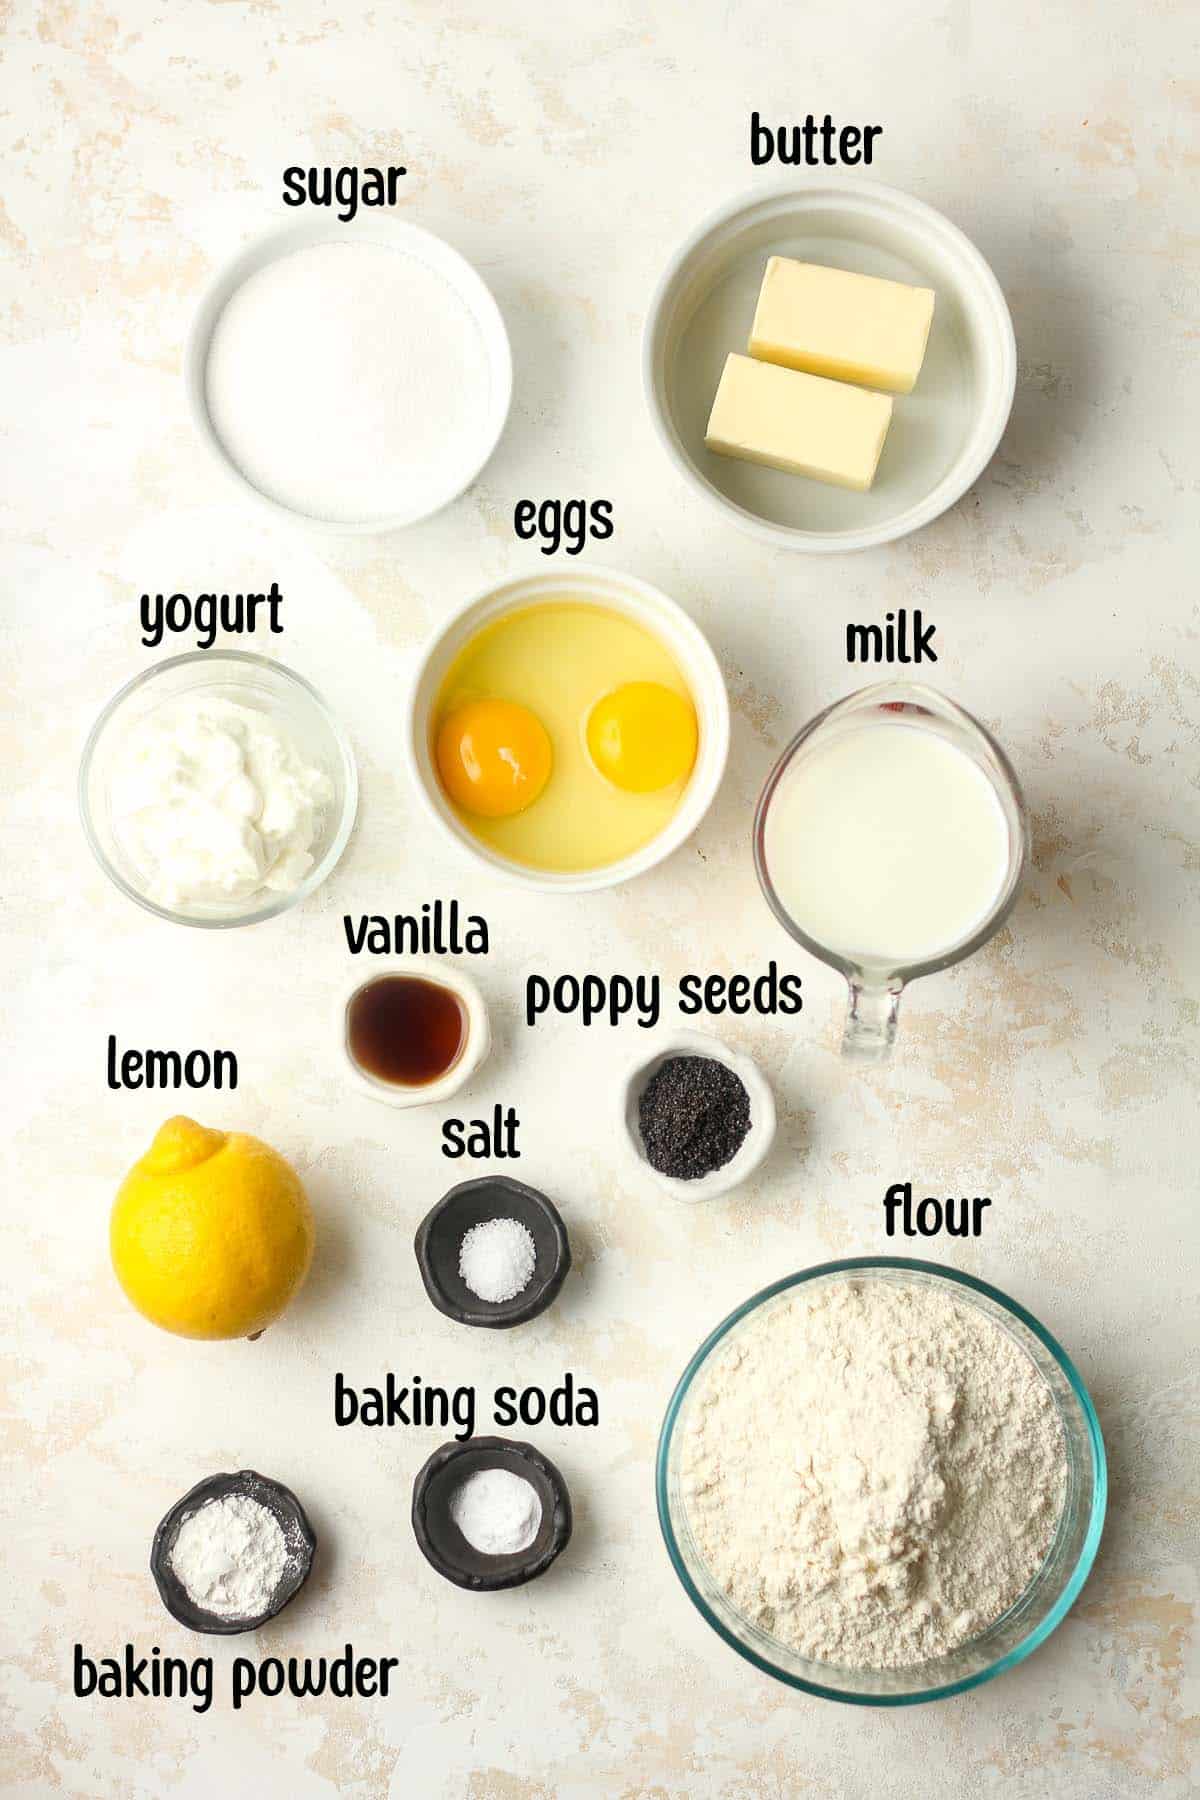 The ingredients for the lemon poppy seed muffins.